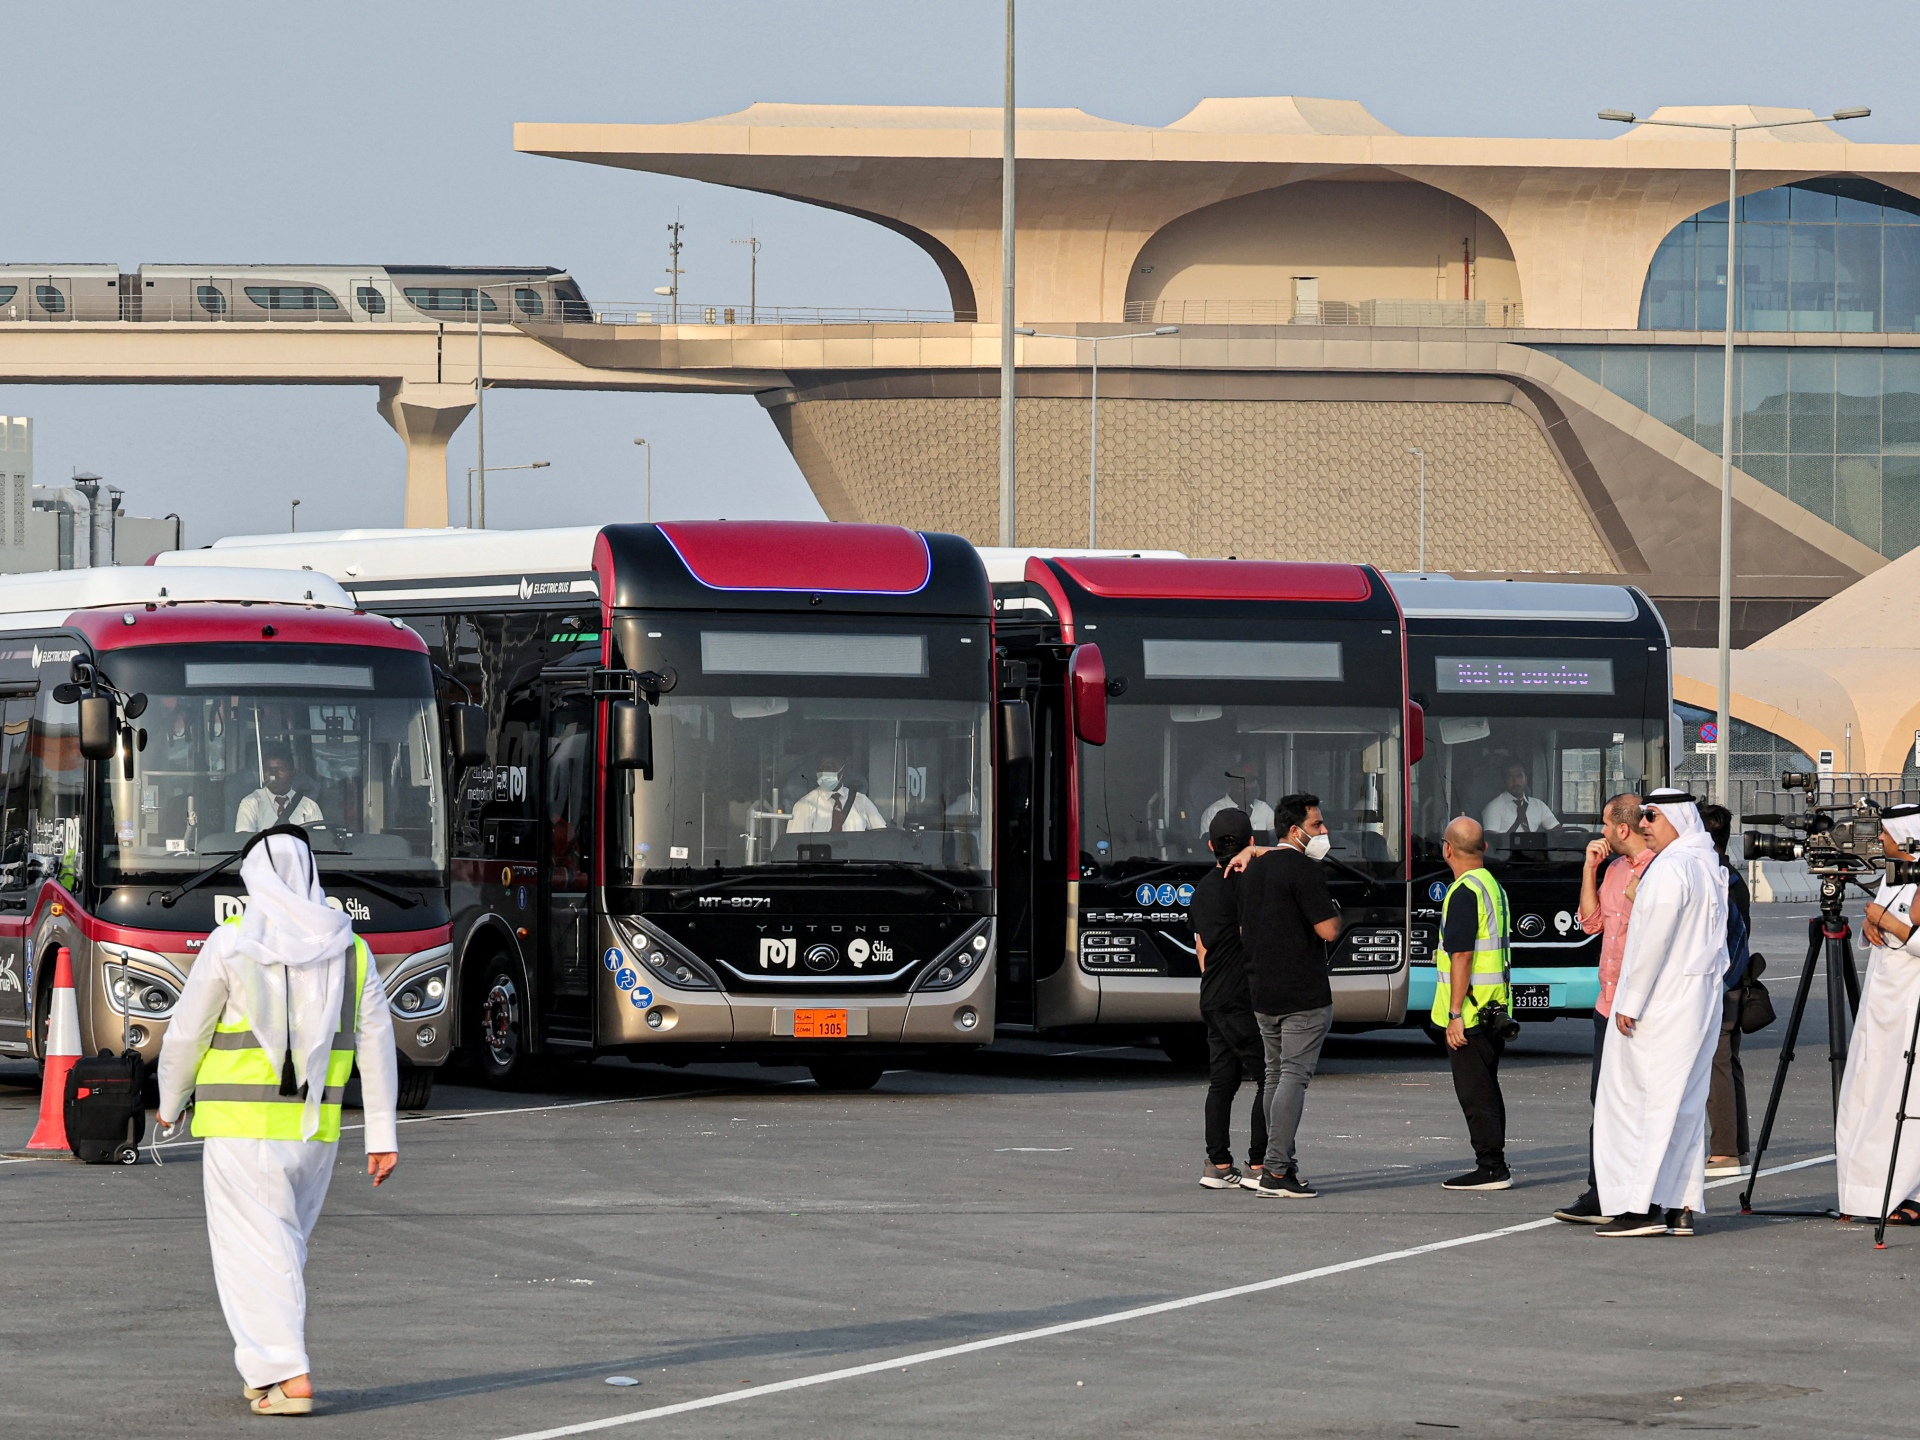 Mowasalat to operate 4,000 buses during World Cup